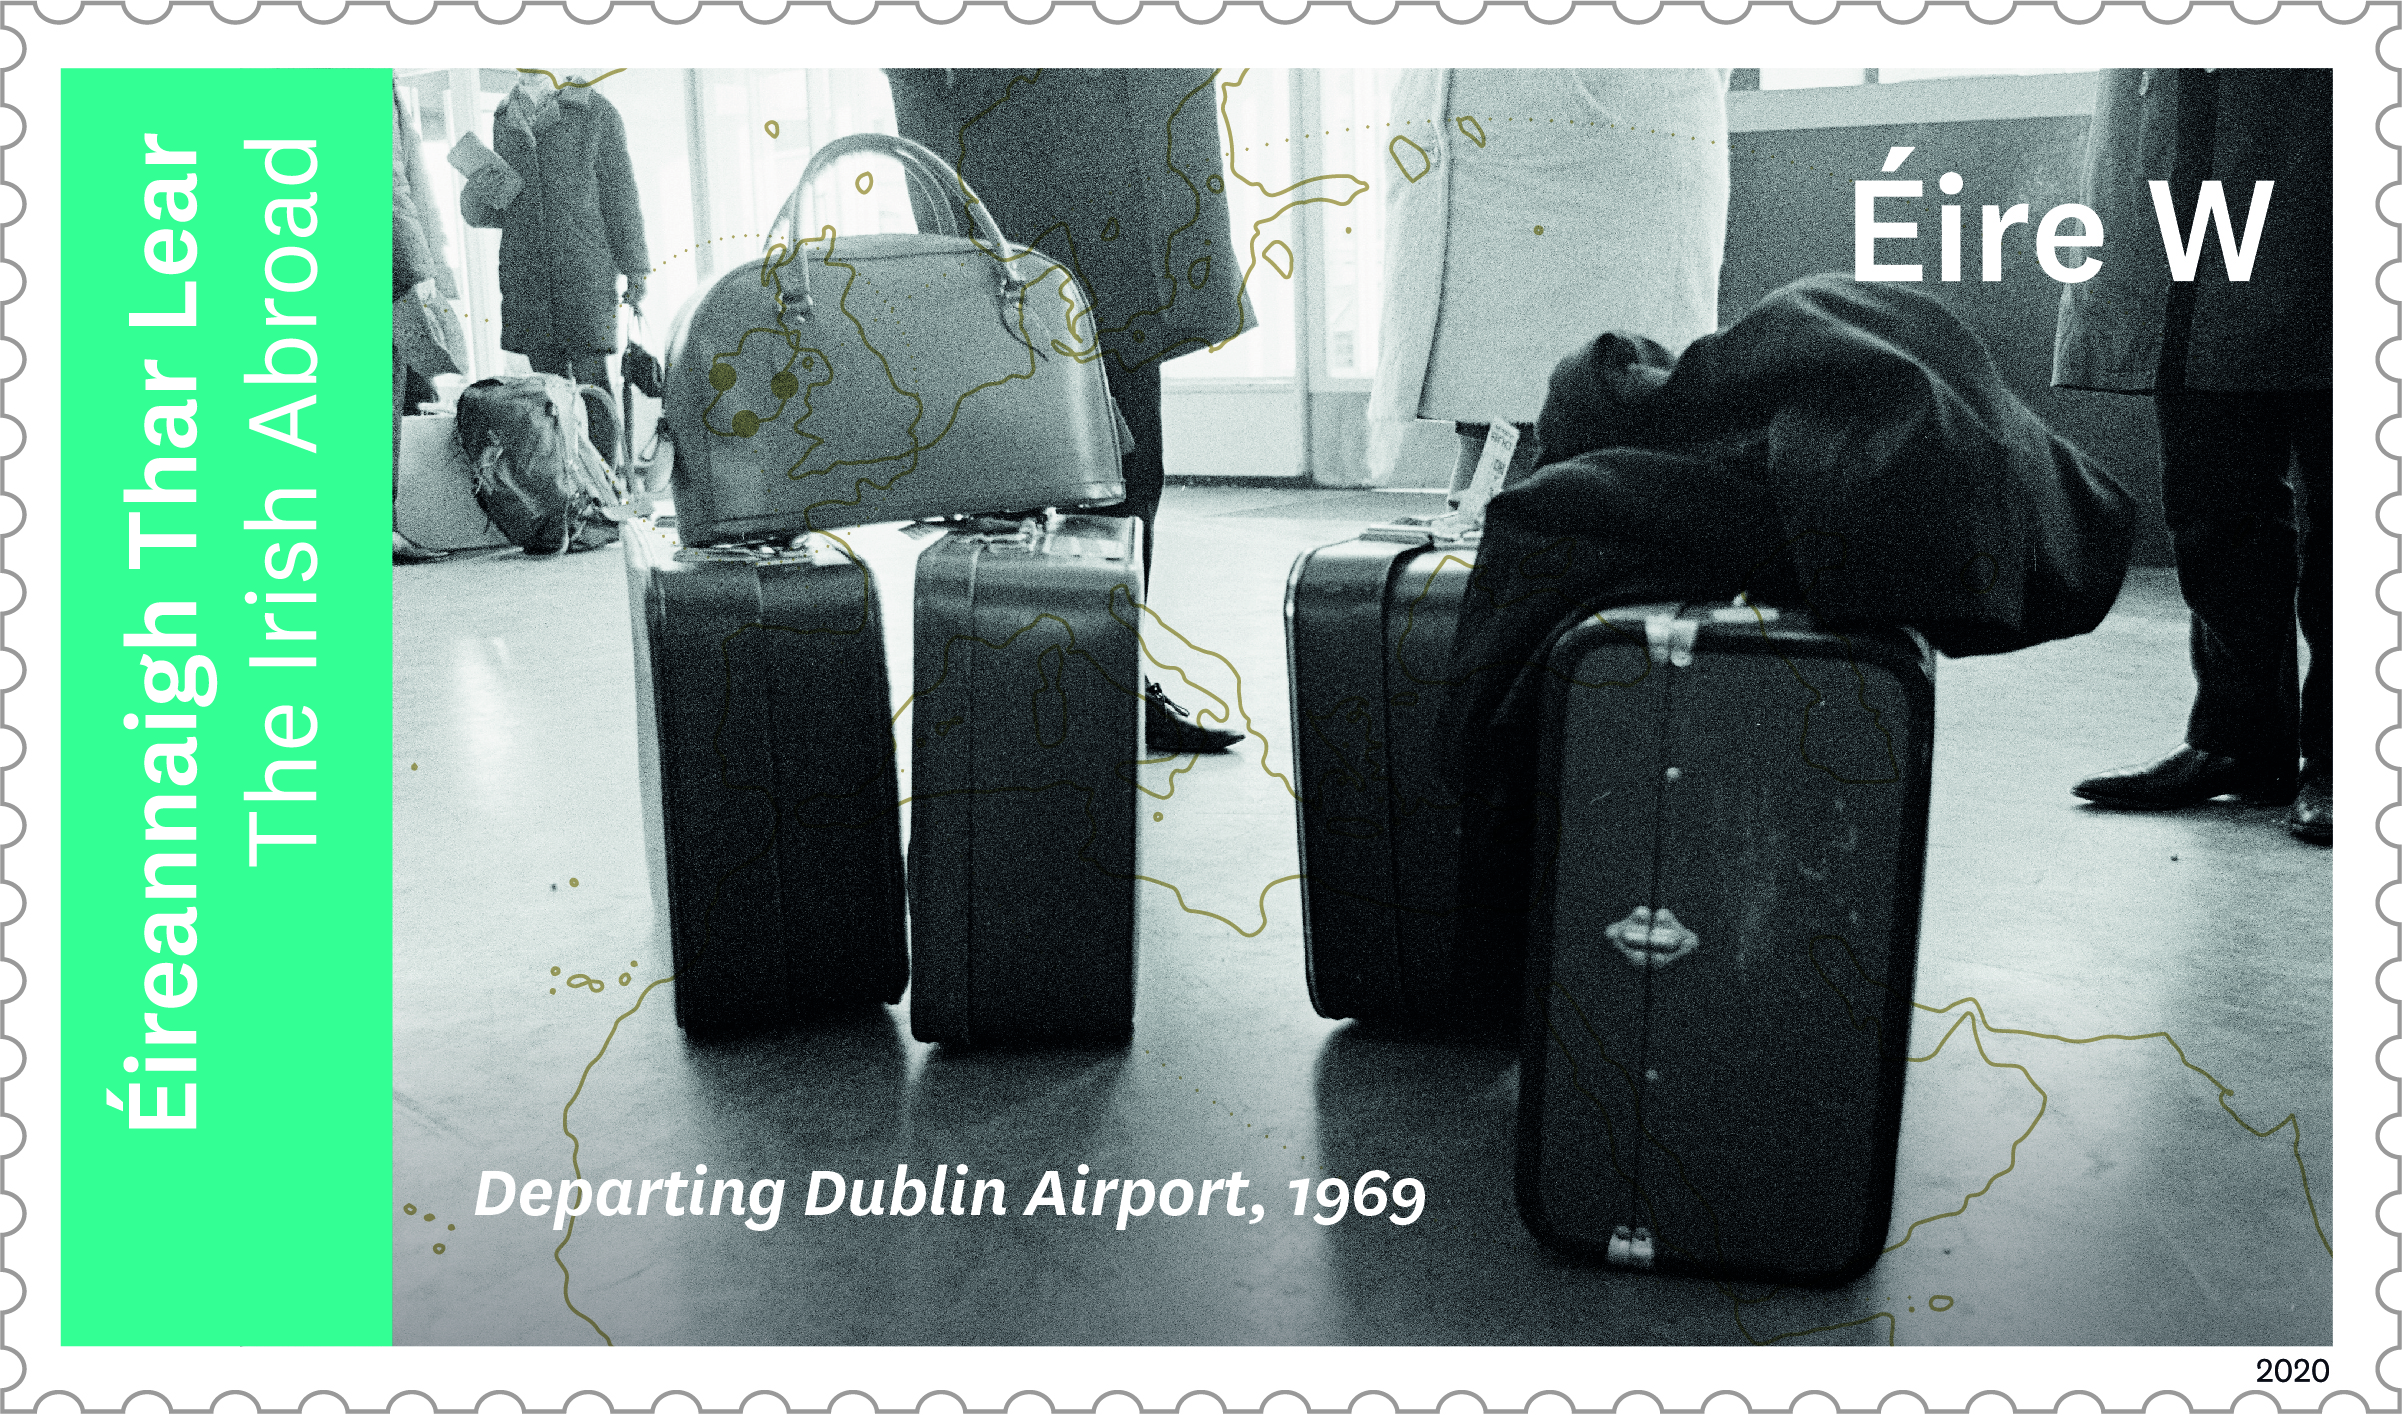 An Post 2020 special edition diaspora postage stamp depicting suitcases at Dublin Airport